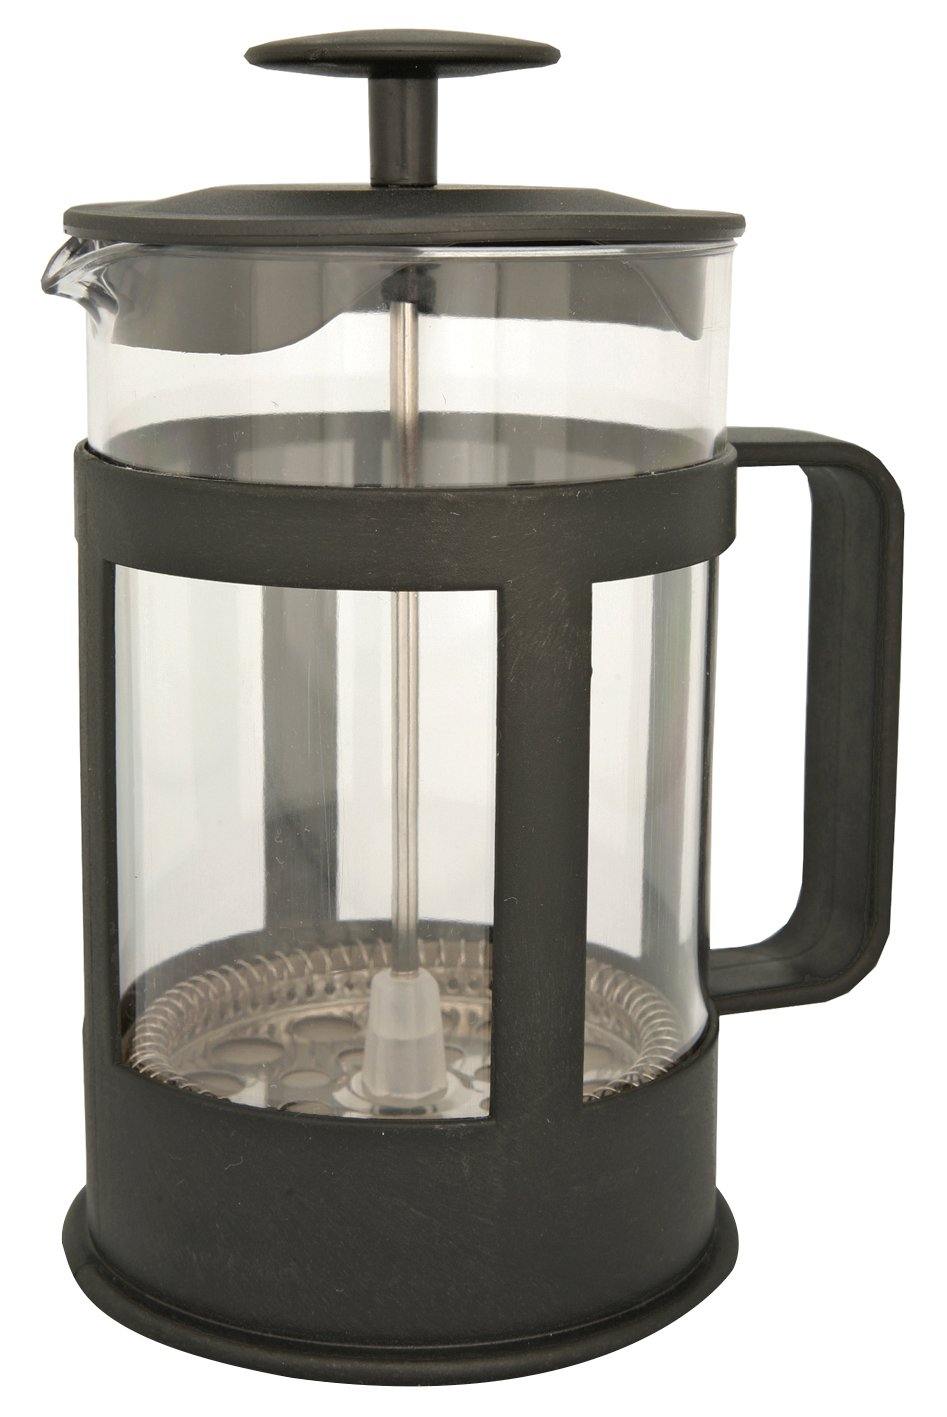 North 49 Coffee And Tea Press - Leapfrog Outdoor Sports and Apparel